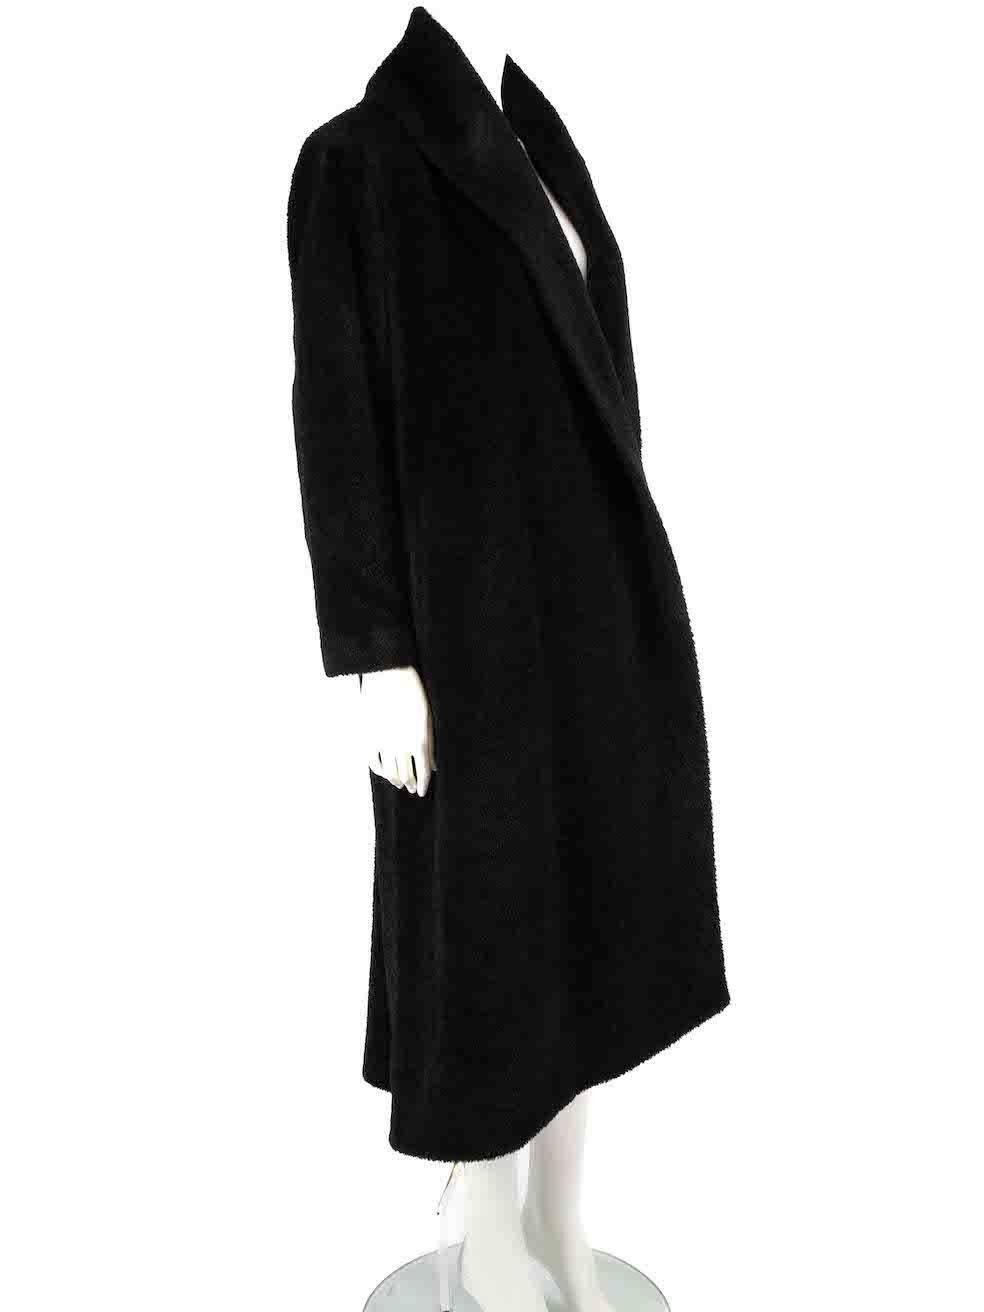 CONDITION is Very good. Hardly any visible wear to coat is evident on this used Max Mara designer resale item.
 
 
 
 Details
 
 
 Black
 
 Alpaca wool
 
 Long coat
 
 Open front
 
 2x Front side pockets
 
 
 
 
 
 Made in Italy
 
 
 
 Composition
